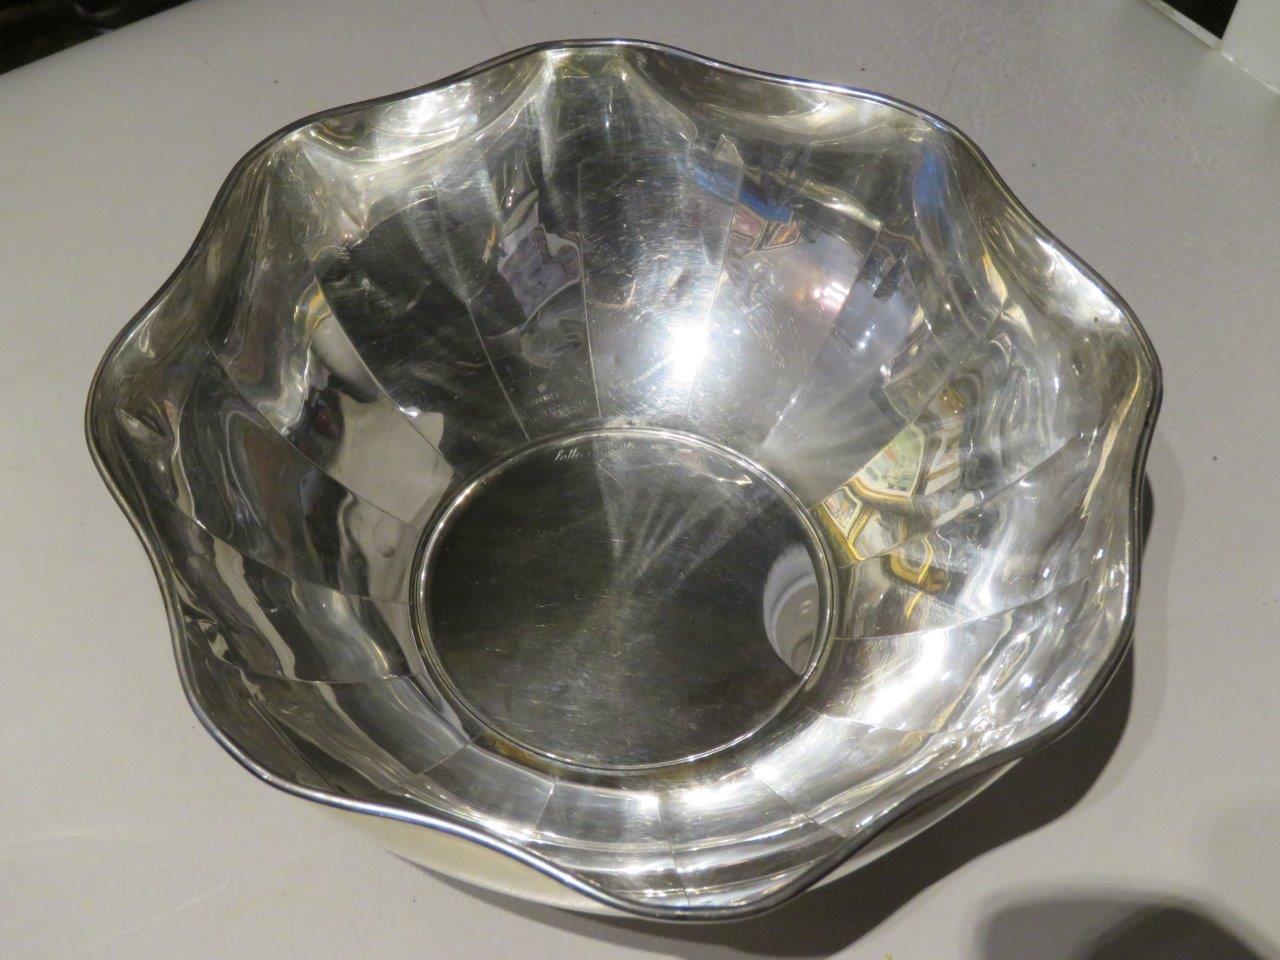 The Following Item we are offering is a Rare Important Gorgeous Rococo Spaulding Sterling Silver Compote Bowl. Bowl is comprised with a Large Fluted Rim Throughout. Slight areas of wear due to age. Signed Etched Italian Intaglia at bottom. Measures